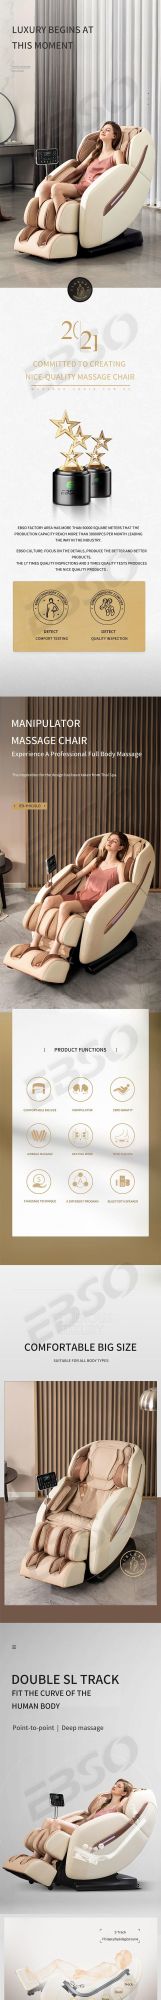 New Technology Professional Manufacturing Leisure Auto Full Body Sofa Massage Chair